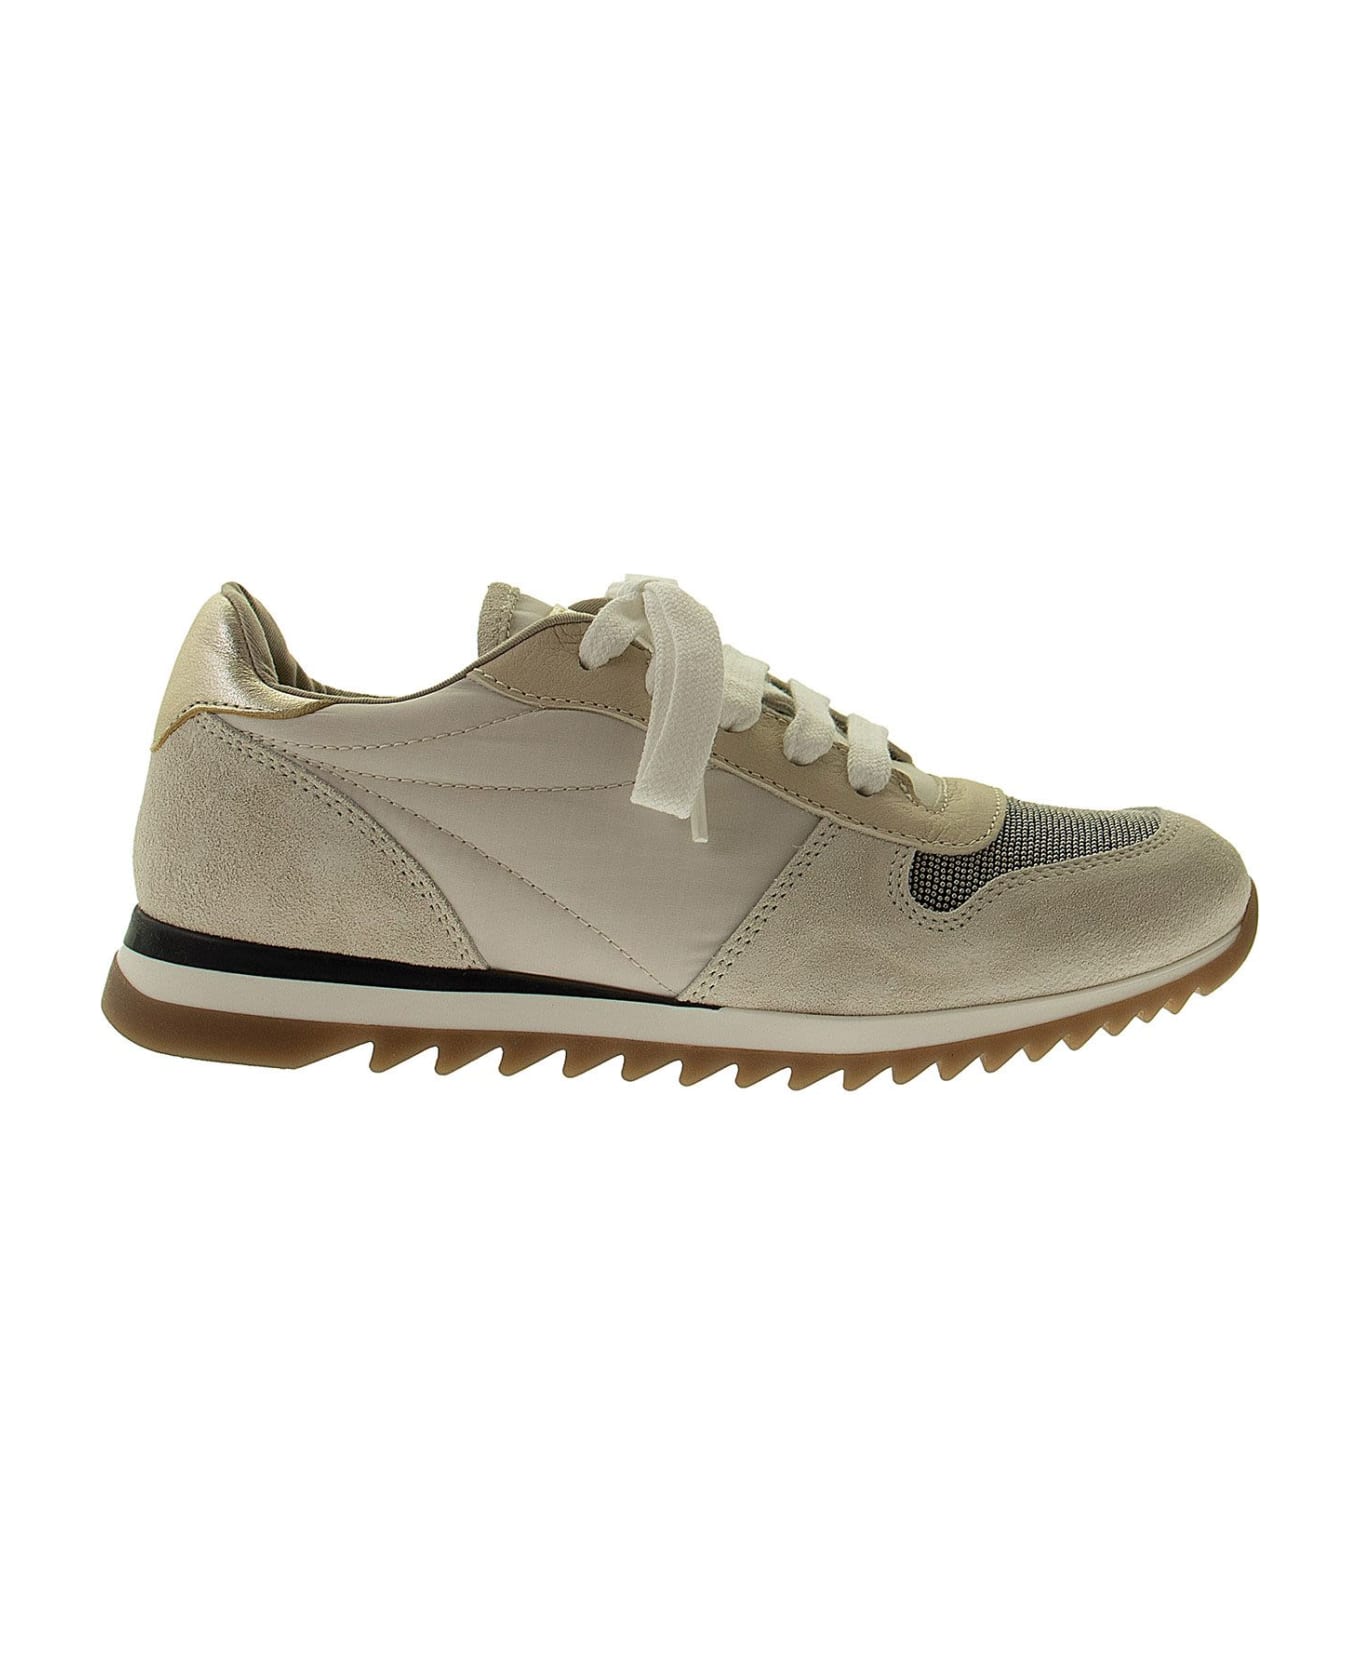 Brunello Cucinelli Suede And Rip-stop Runners With Monili - Light Grey シューズ